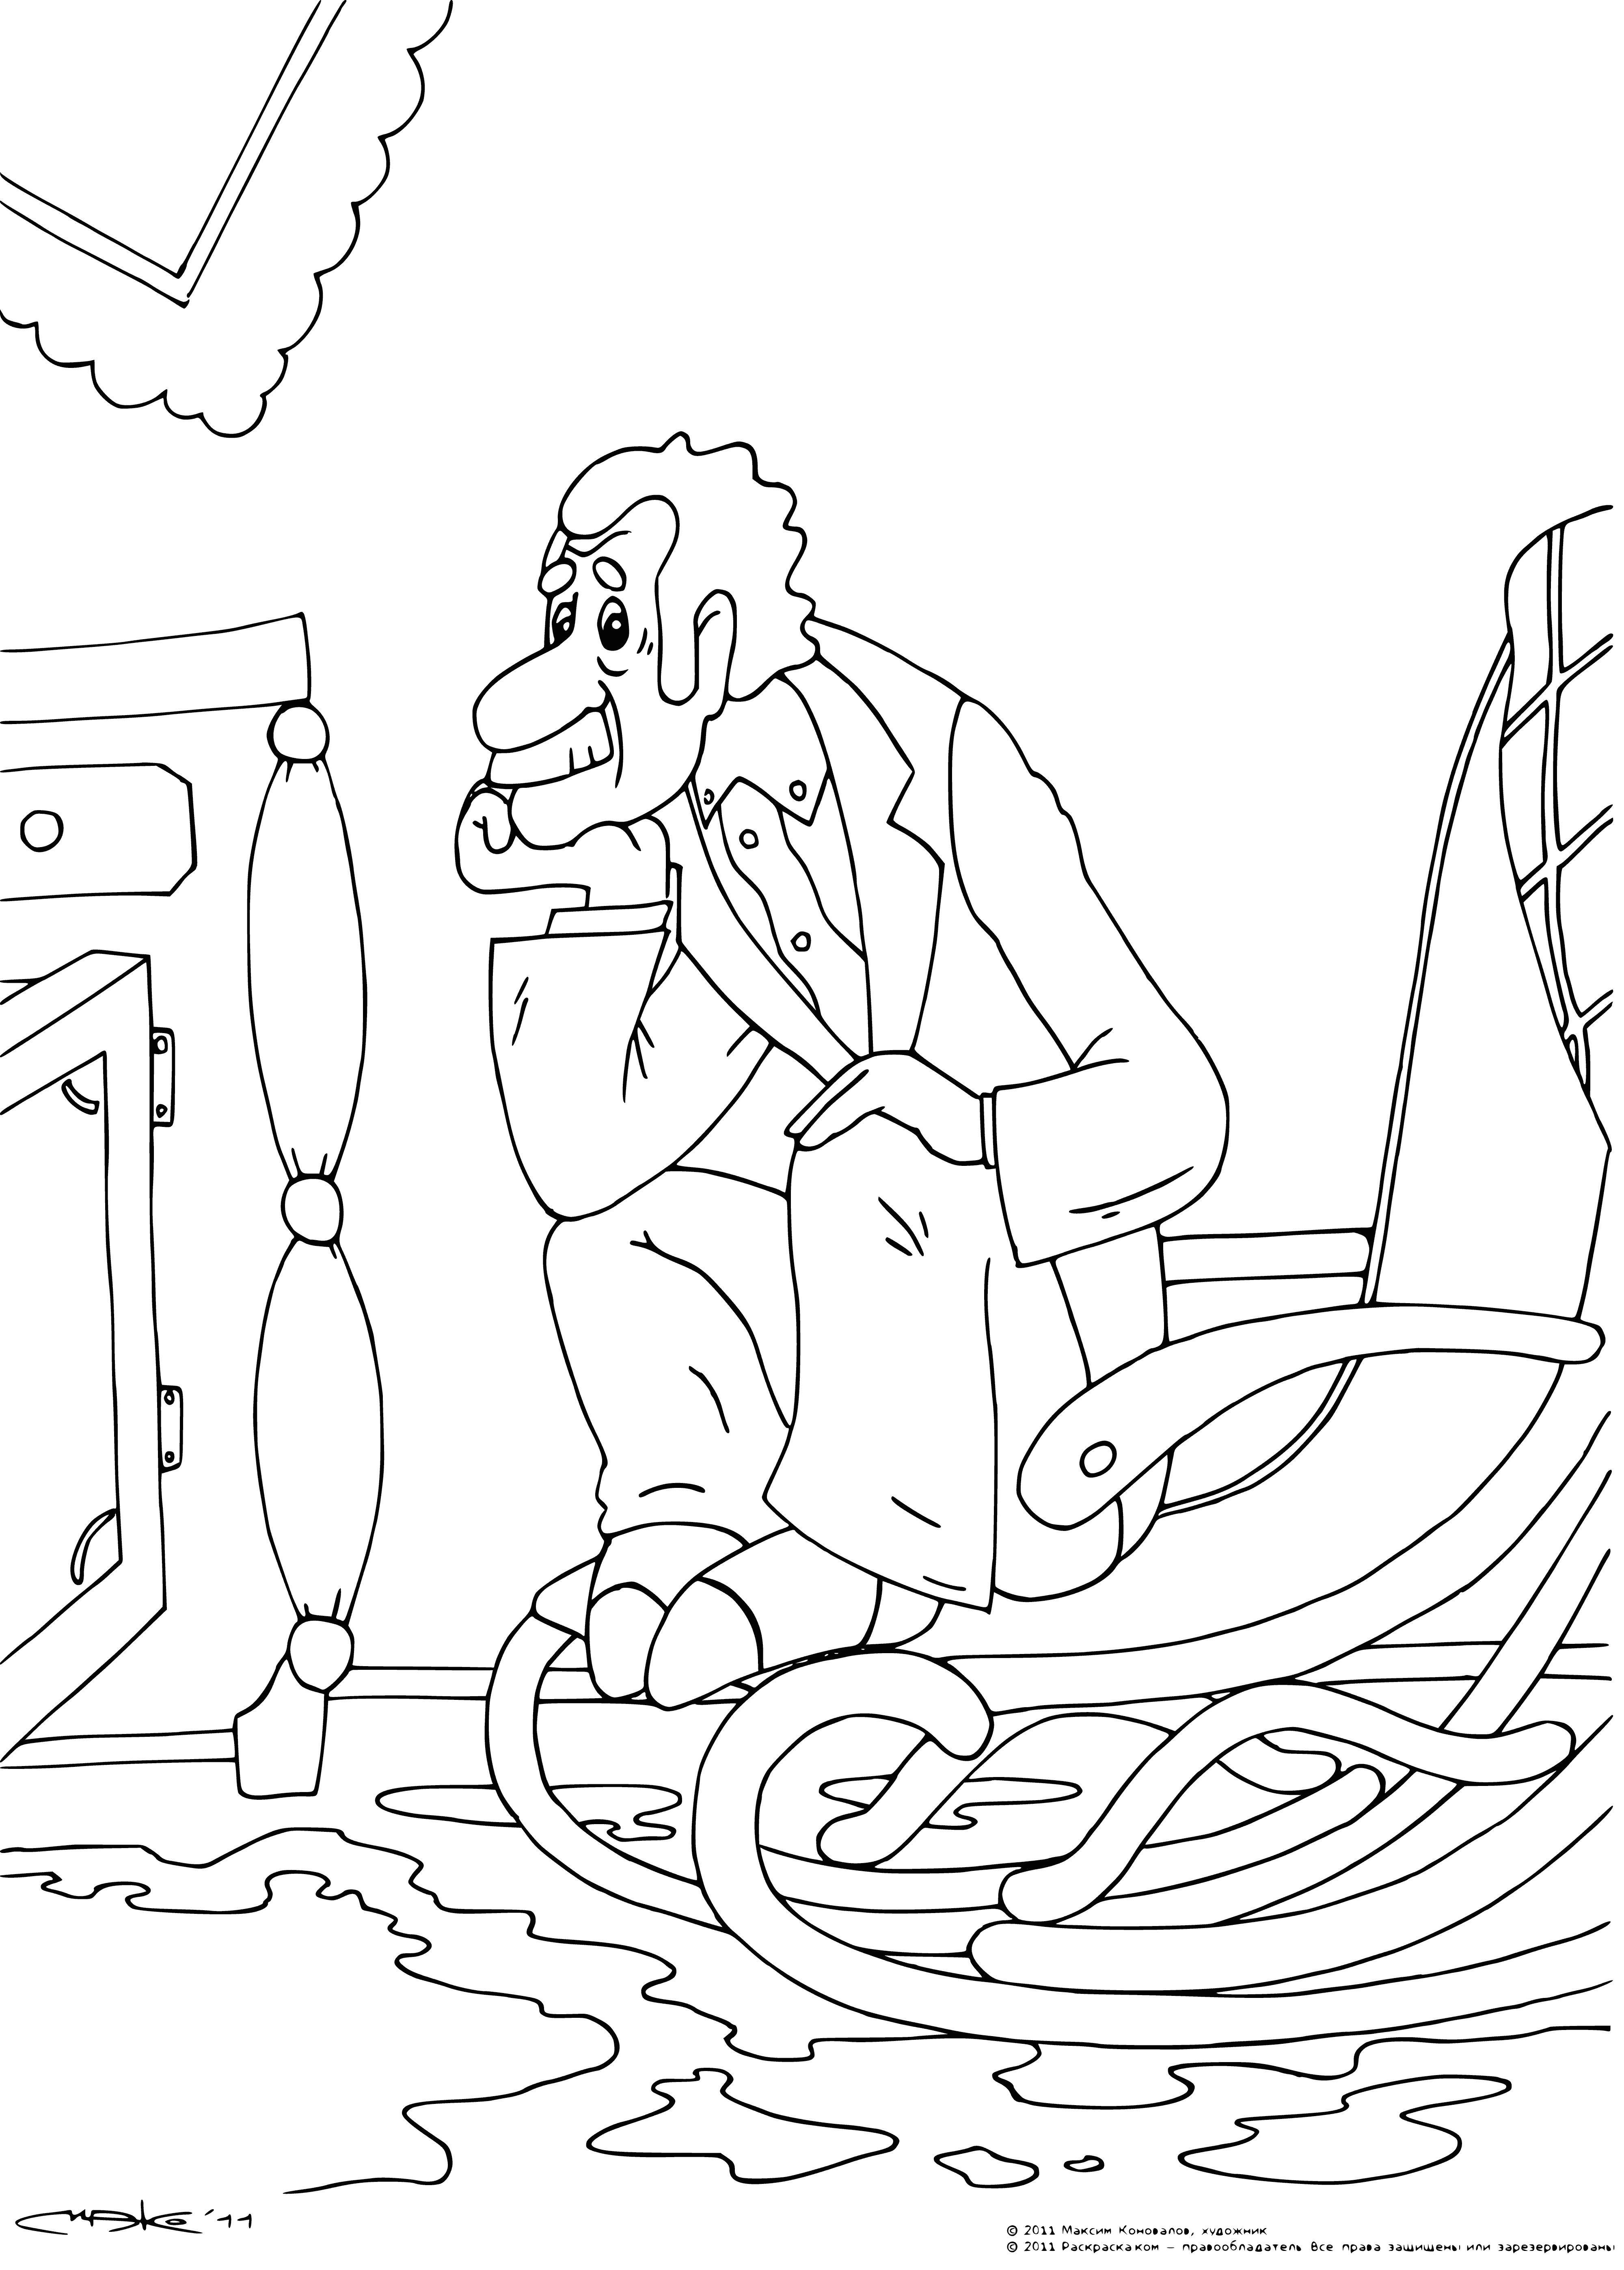 coloring page: Bobik the dog visits Barbos the cat, frisking around the garden and smelling flowers. Barbos smiles, watching Bobik.